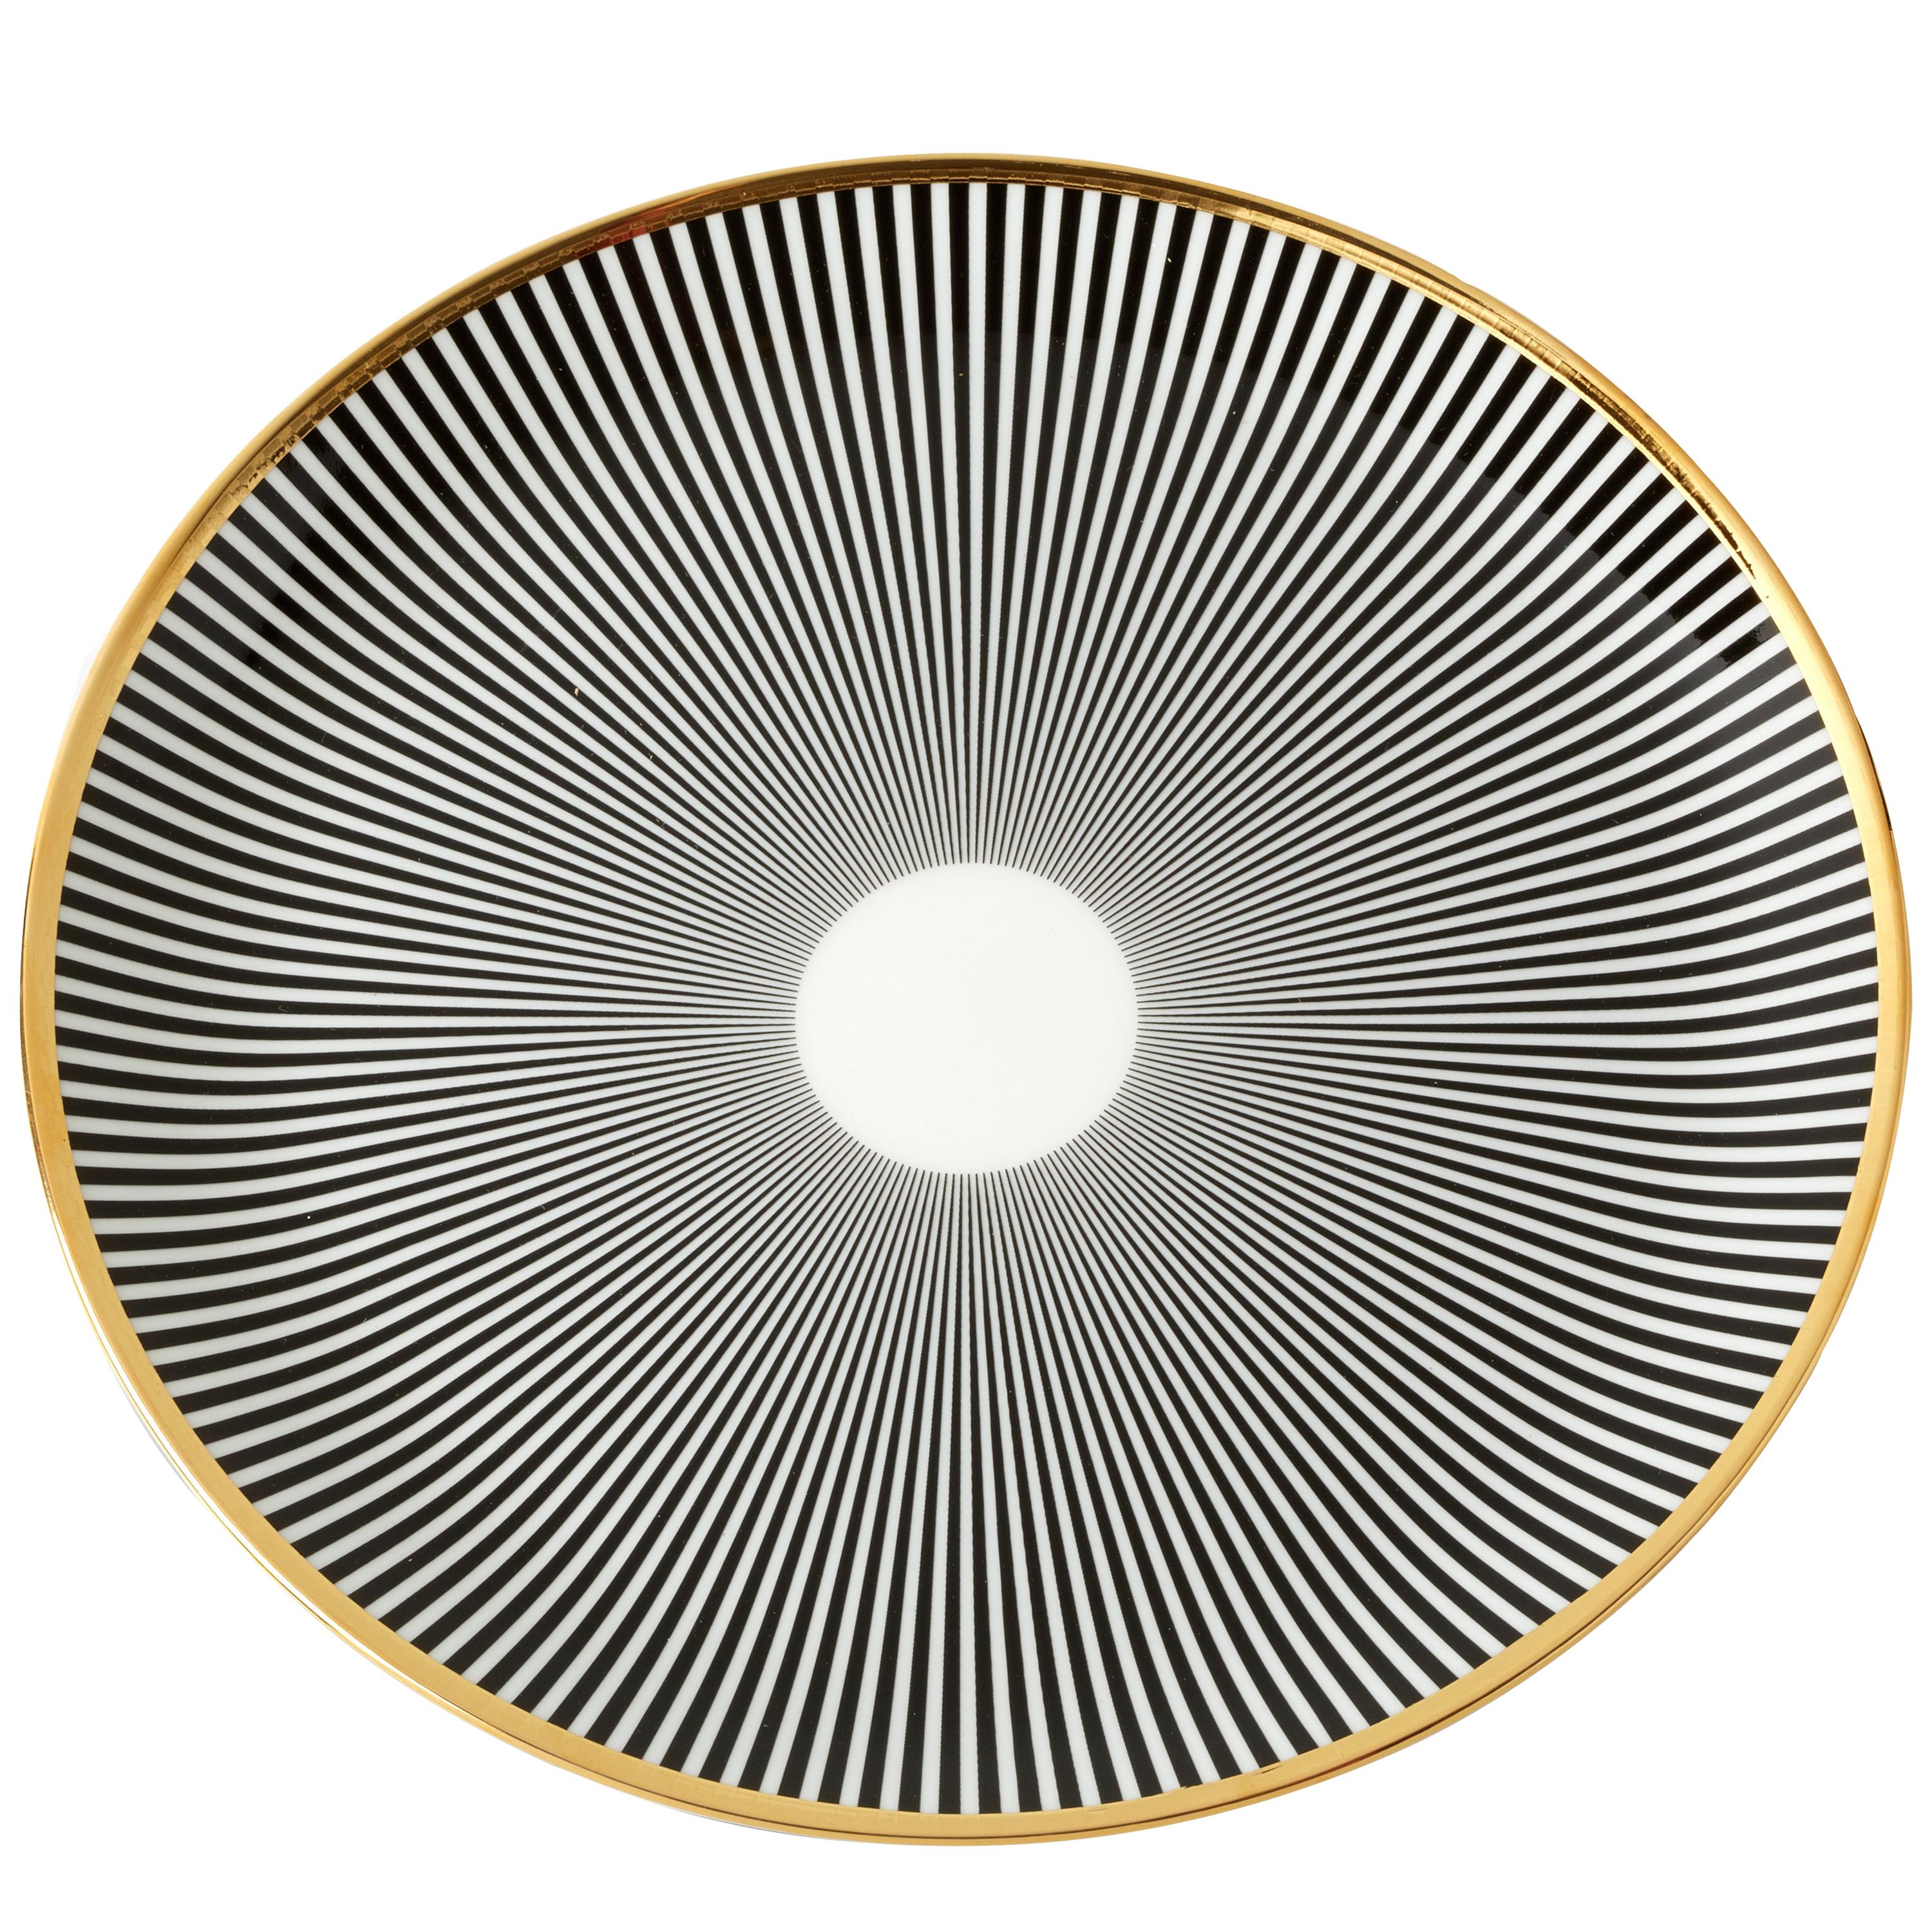 Bone China Dinner Plate with 22-Carat Gold and Black Decals